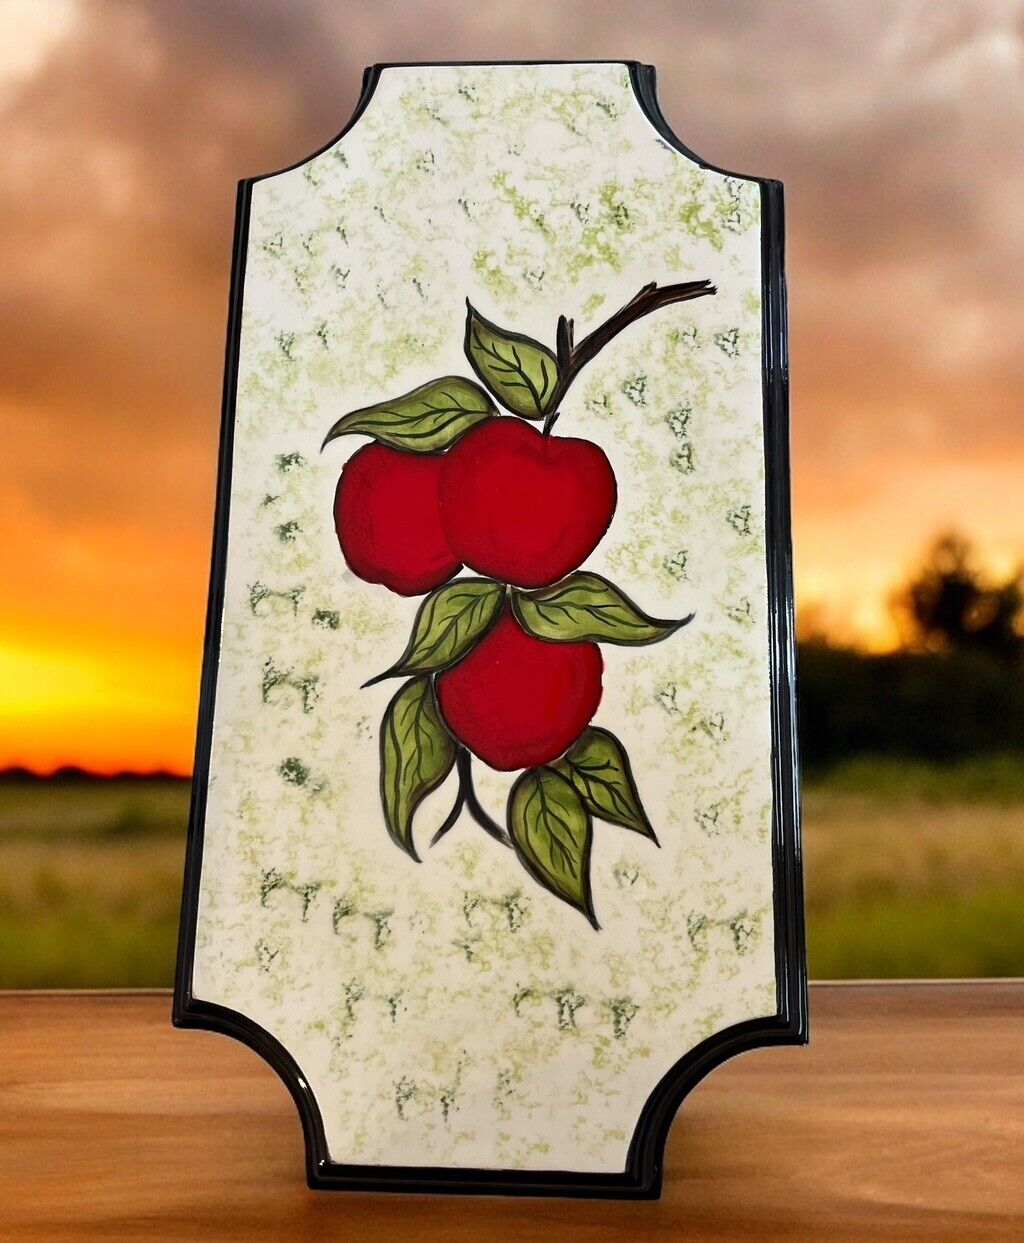 Vintage 1970’s 16” Apples Ceramic Hanging Wall Plaque Lacquered Decor Cottage